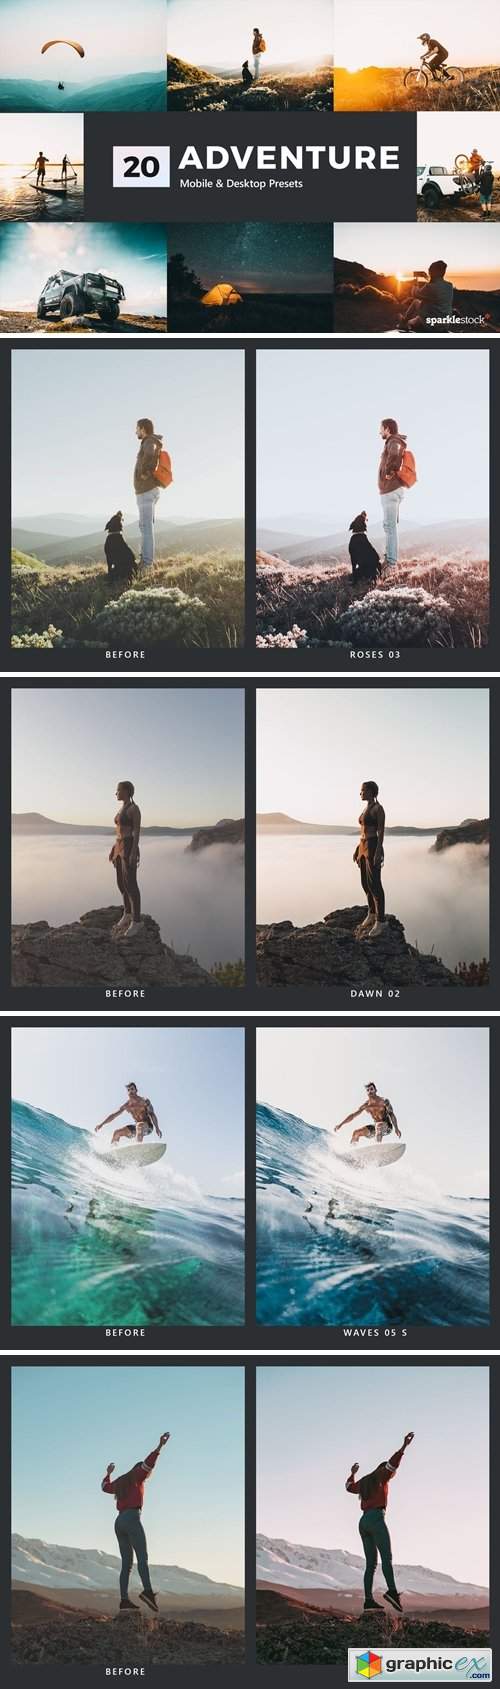  20 Adventure Lightroom Presets and LUTs 